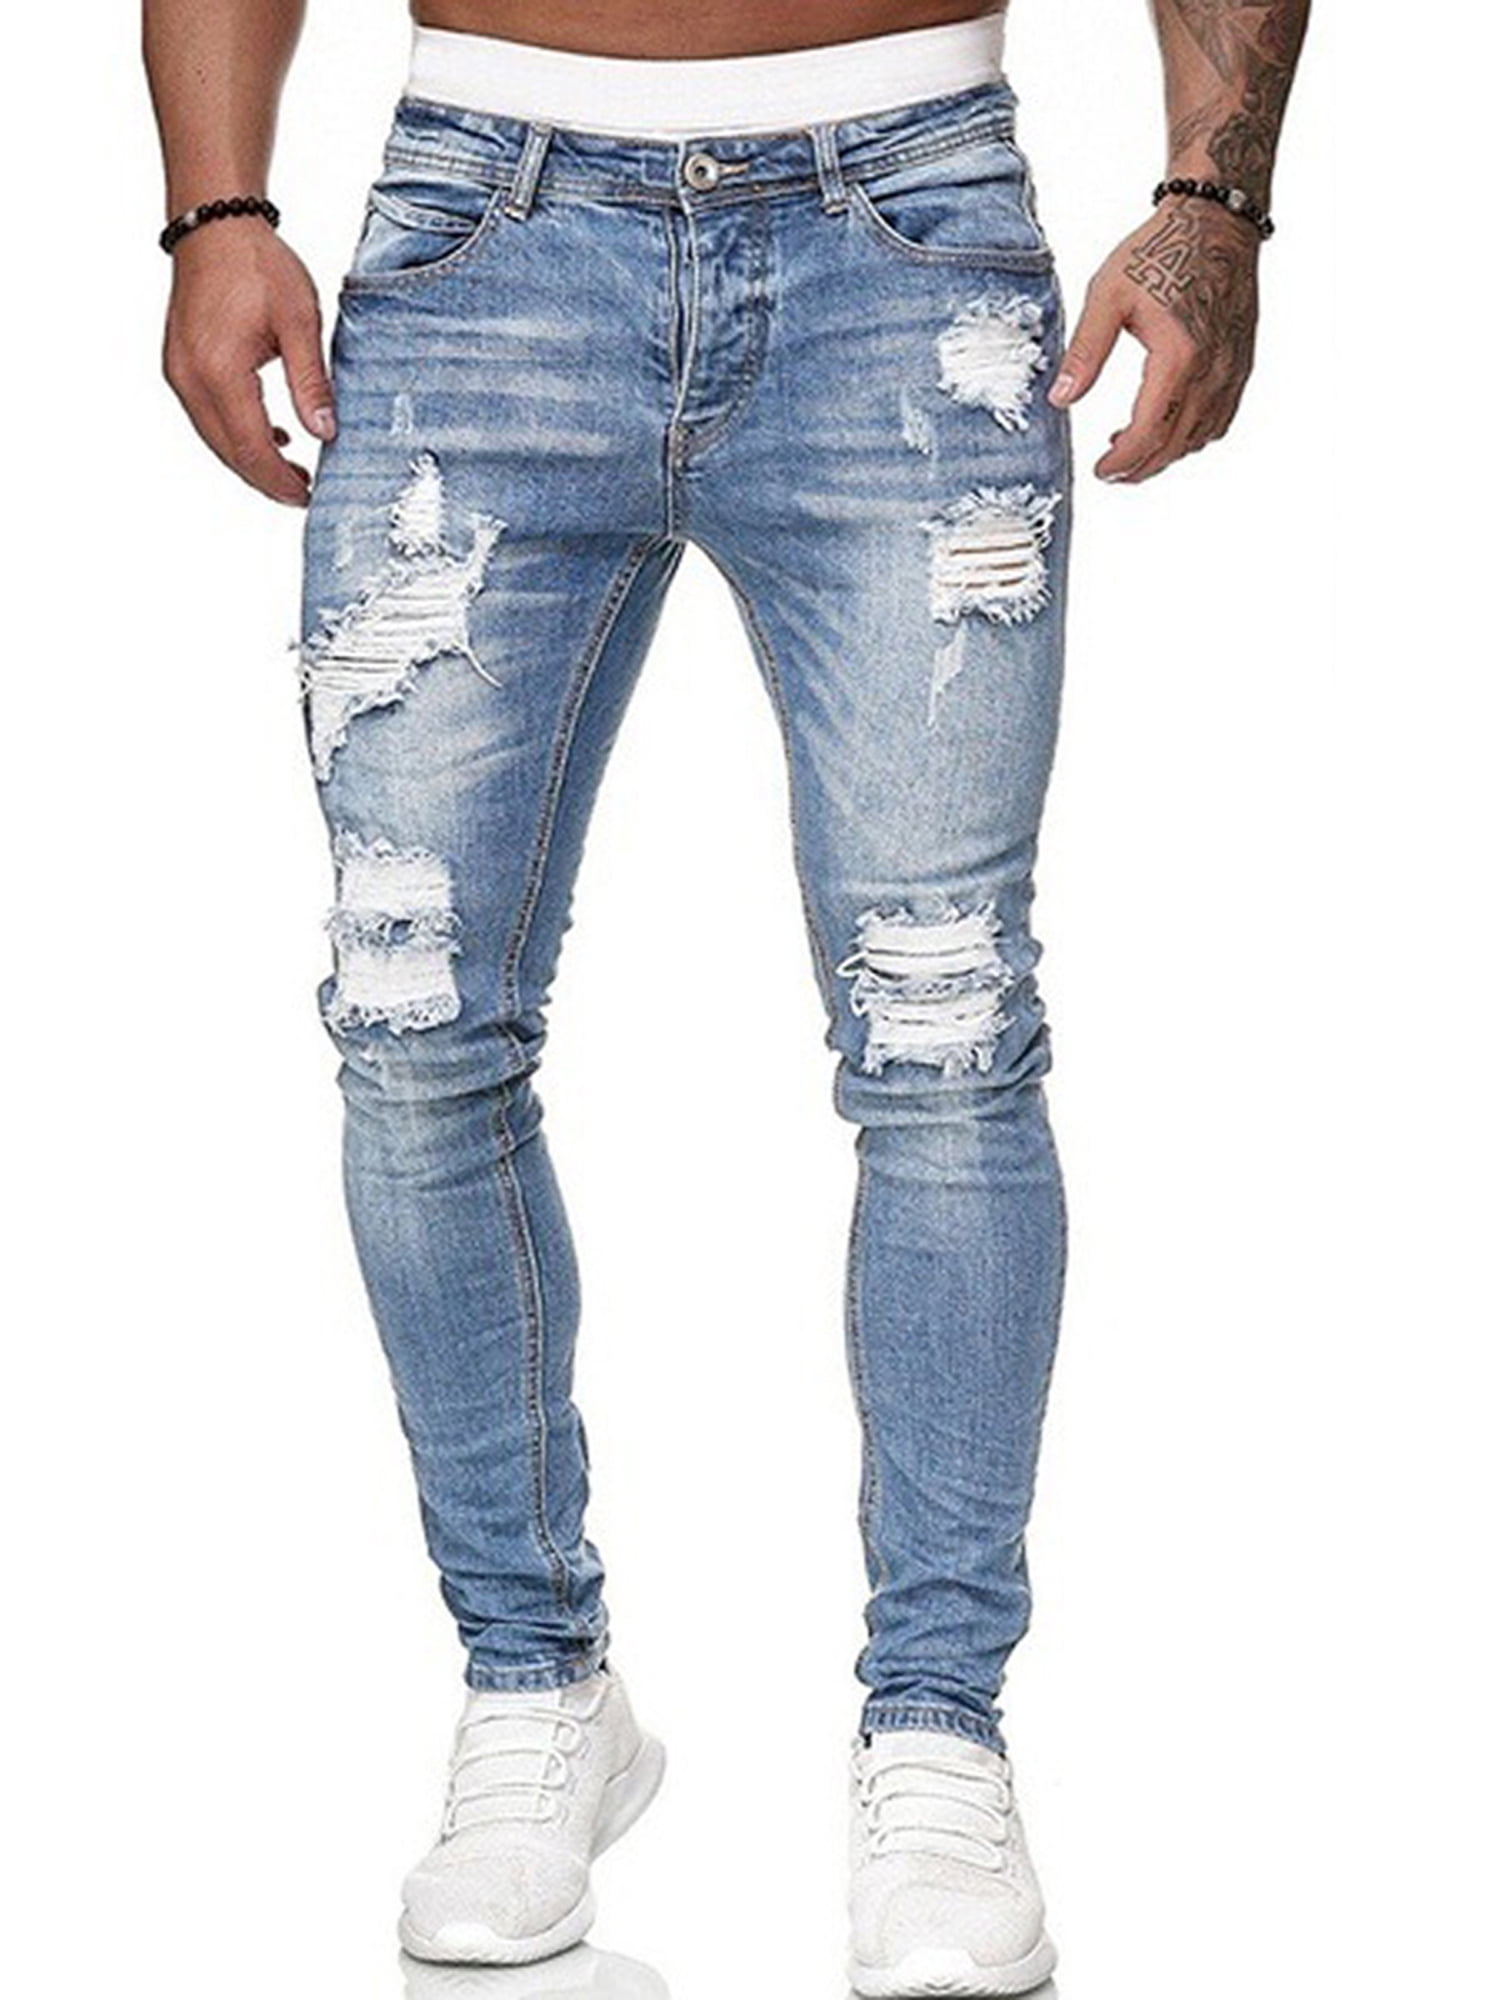 Men's ripped jeans  Light color jeans, Ripped jeans, Ripped jeans men